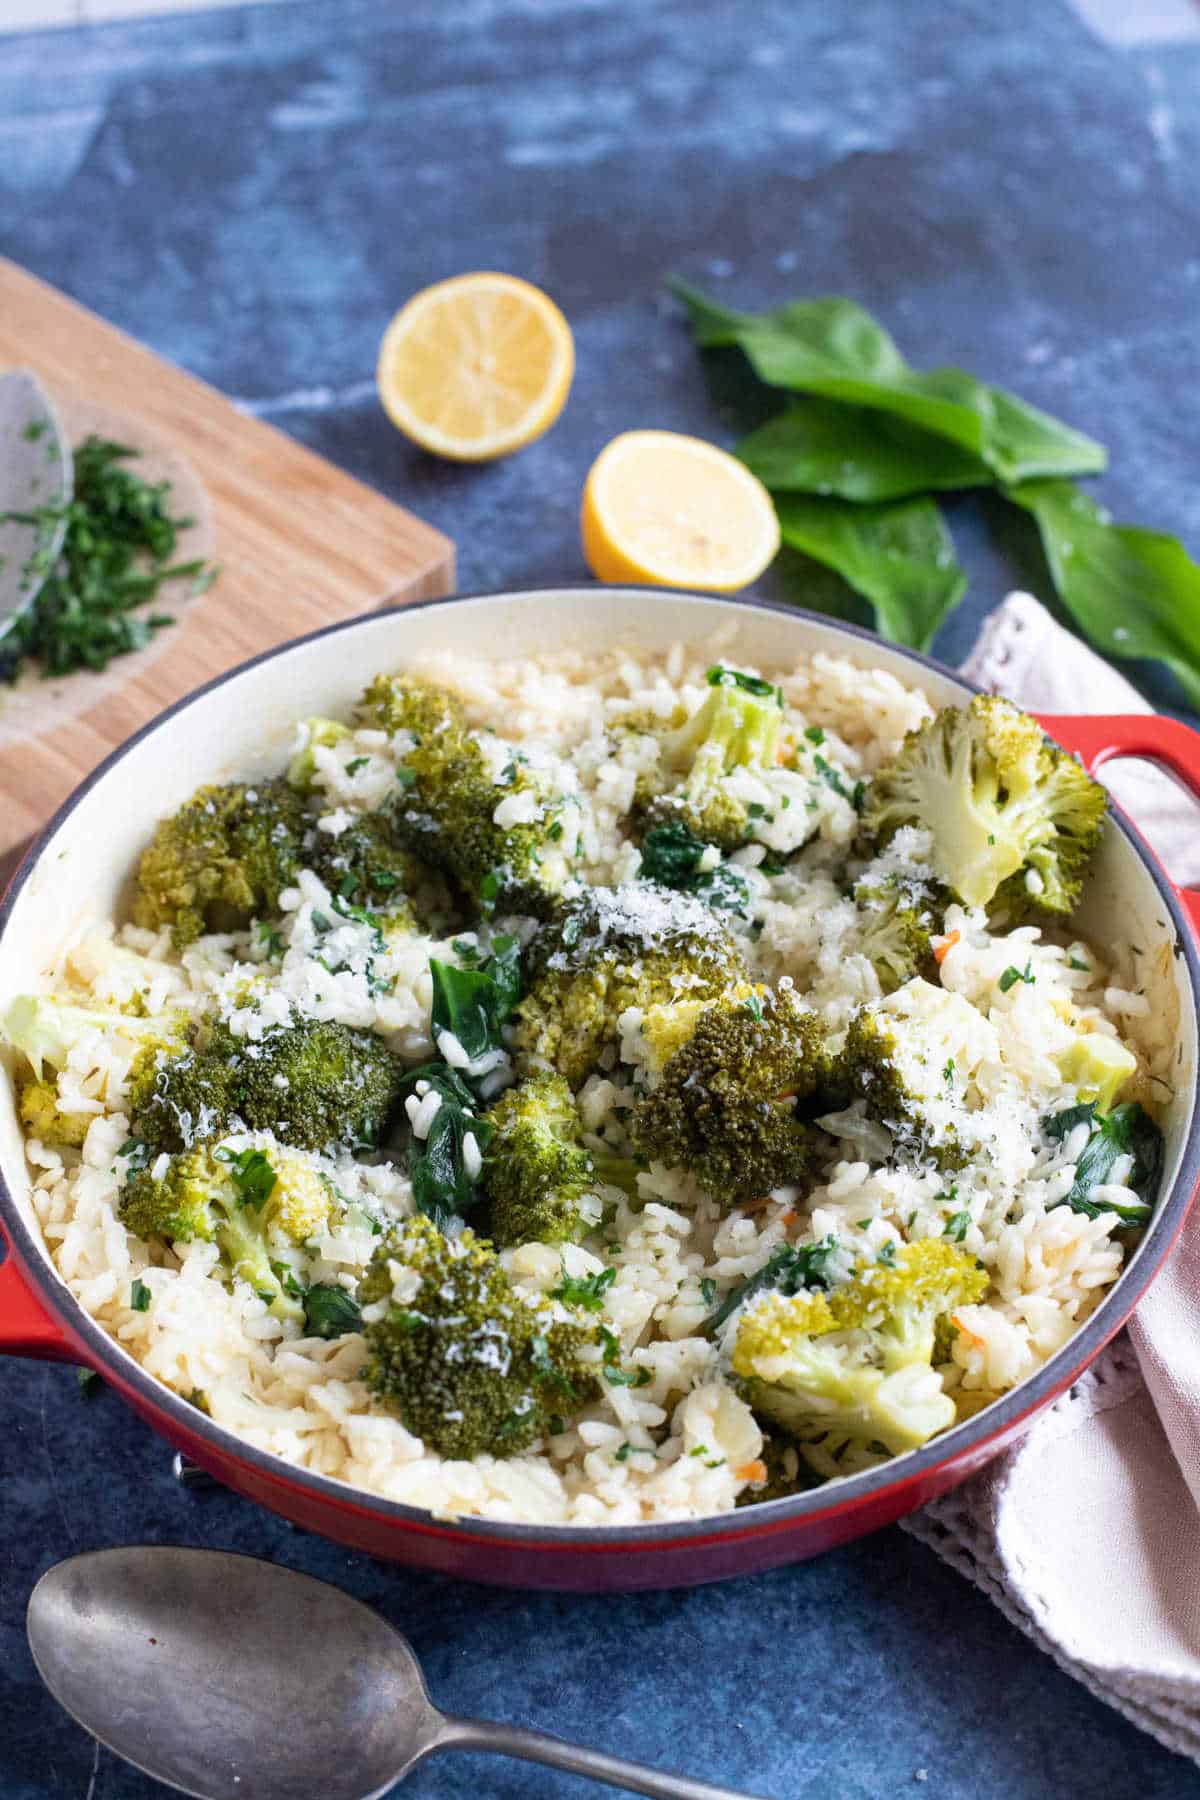 Oven baked broccoli and wild garlic risotto.